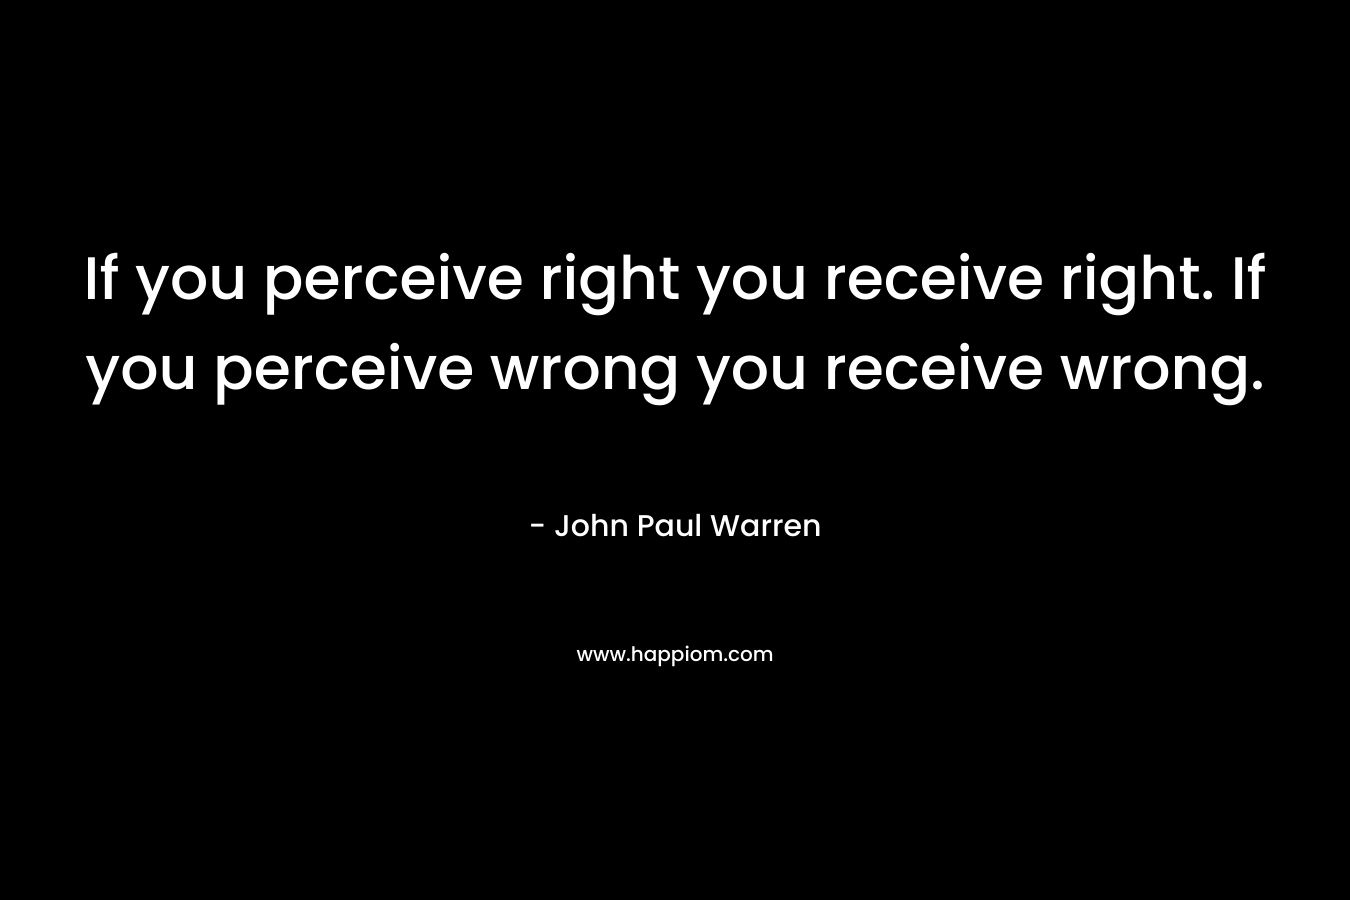 If you perceive right you receive right. If you perceive wrong you receive wrong.